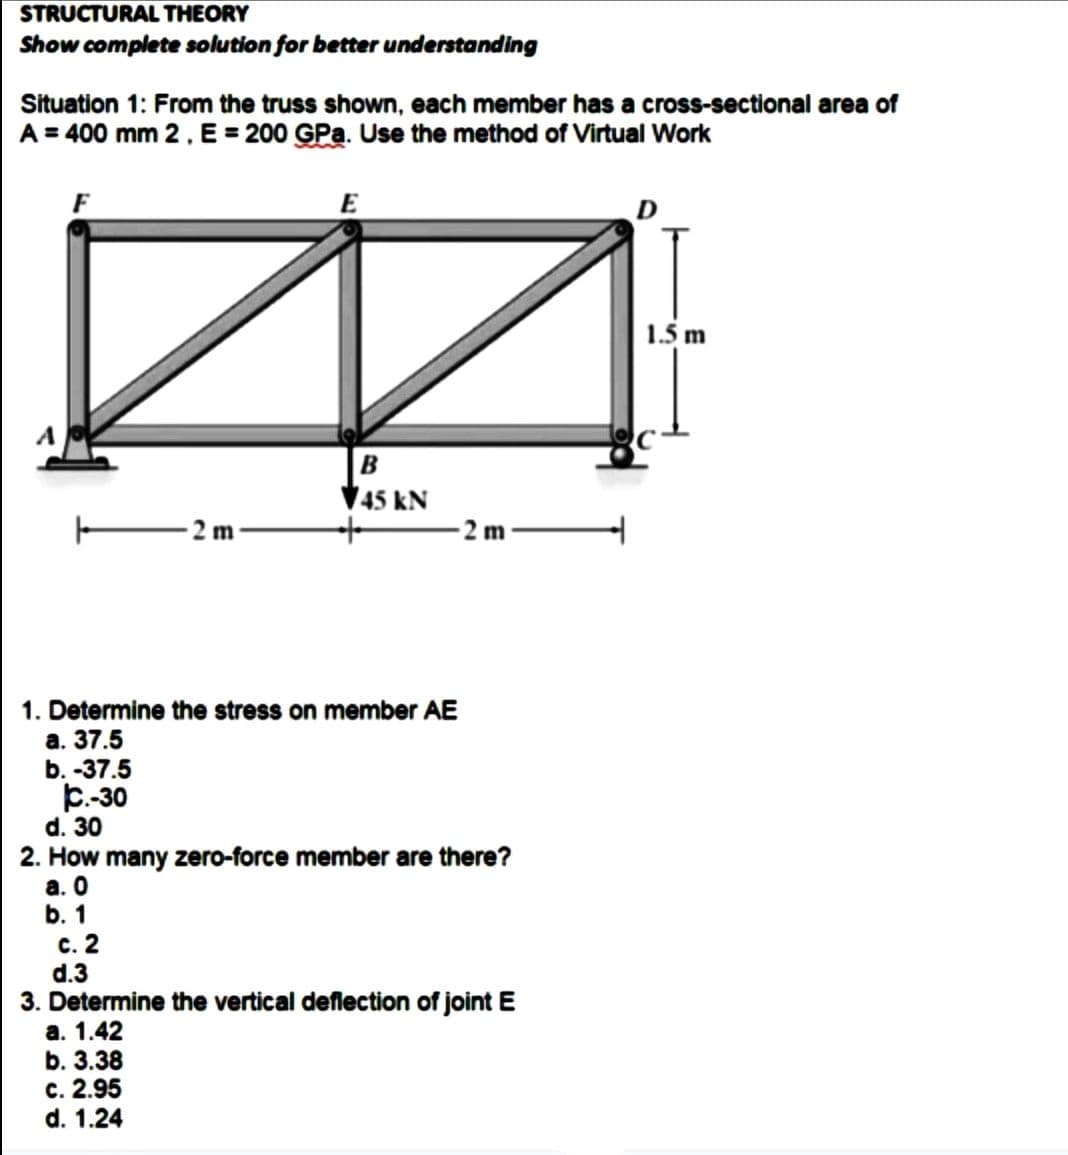 STRUCTURAL THEORY
Show complete solution for better understanding
Situation 1: From the truss shown, each member has a cross-sectional area of
A = 400 mm 2, E = 200 GPa. Use the method of Virtual Work
F
b.-37.5
C.-30
d. 30
-2m-
1. Determine the stress on member AE
a. 37.5
E
c. 2
d.3
n
B
45 KN
2 m
2. How many zero-force member are there?
a. 0
b. 1
3. Determine the vertical deflection of joint E
a. 1.42
b. 3.38
c. 2.95
d. 1.24
1.5 m